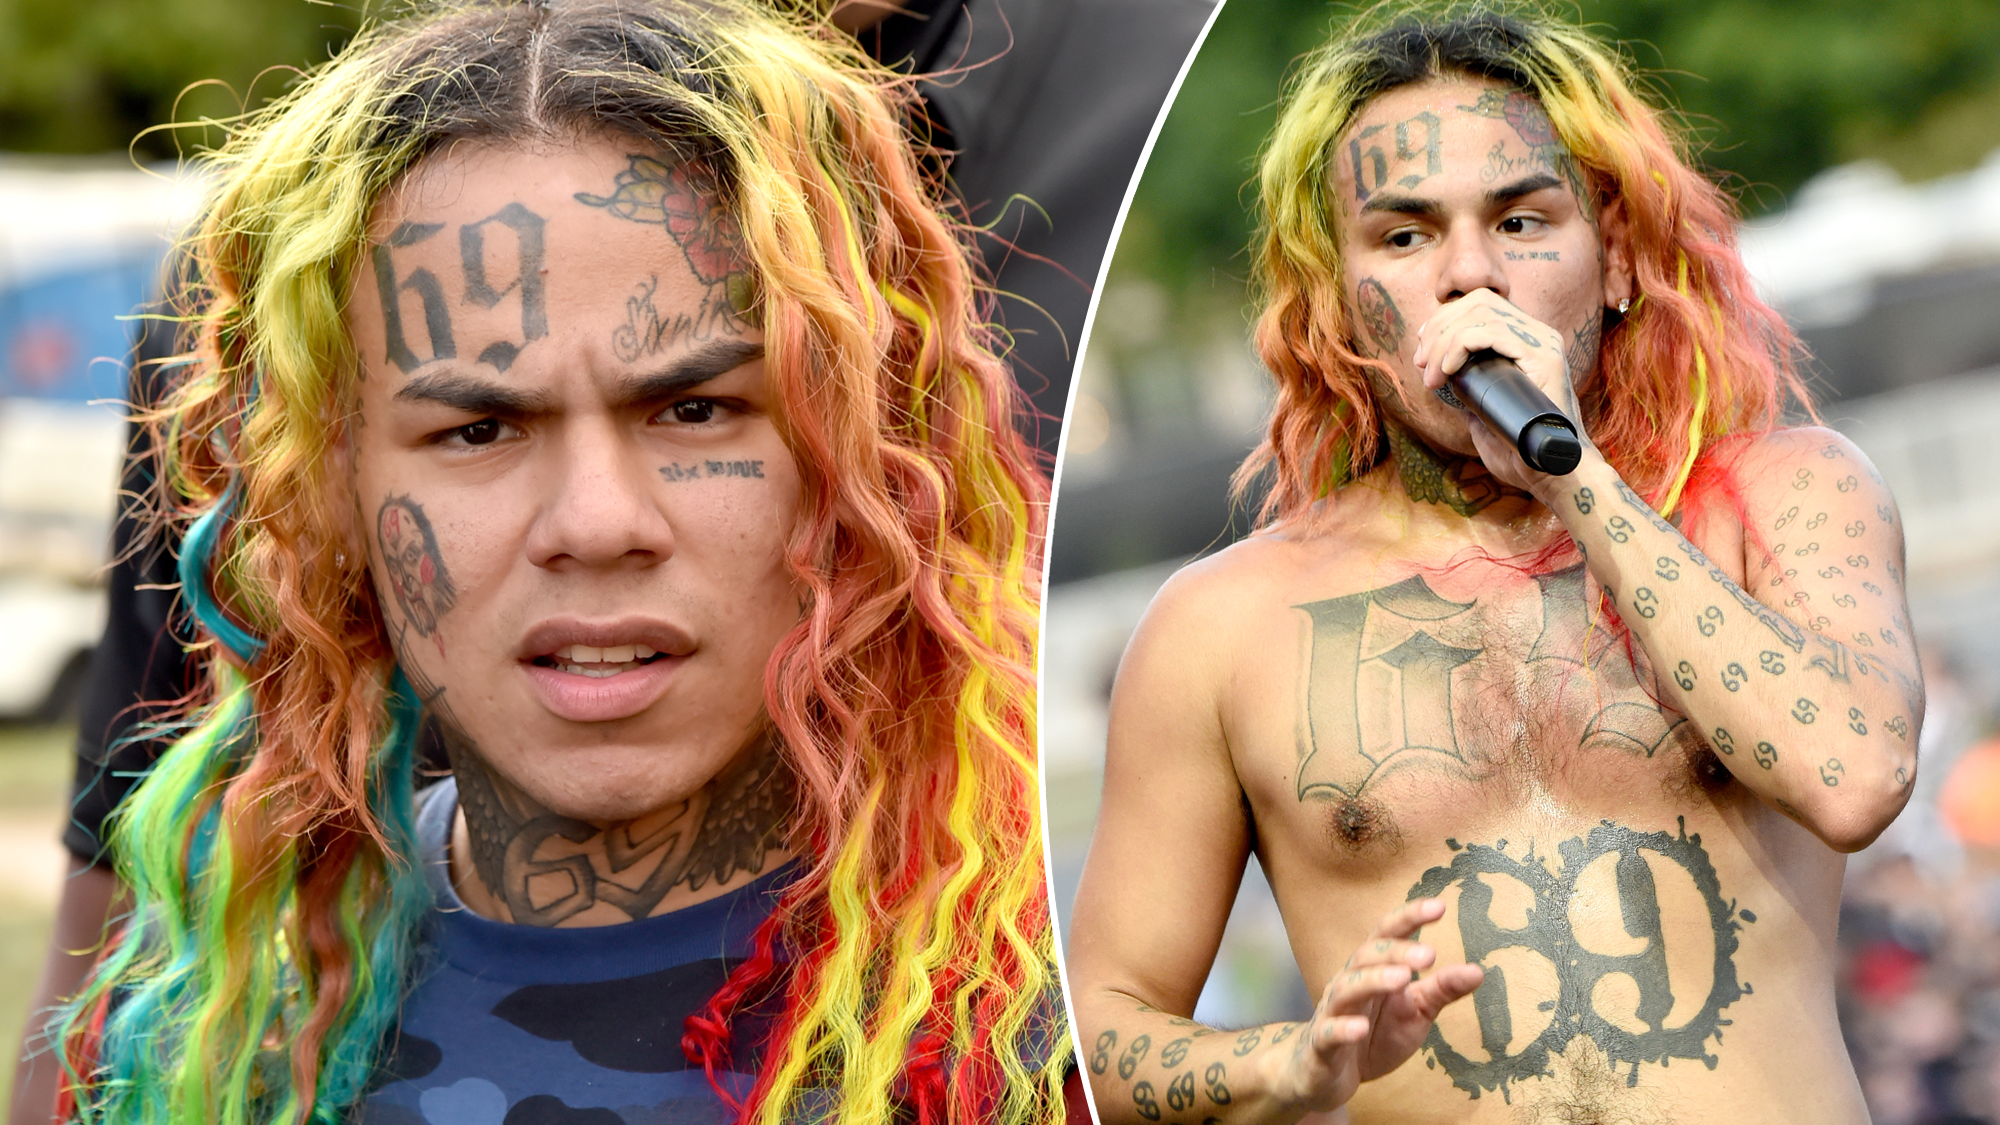 Tekashi 6ix9ine S Mysterious Real Meaning Behind His Name.